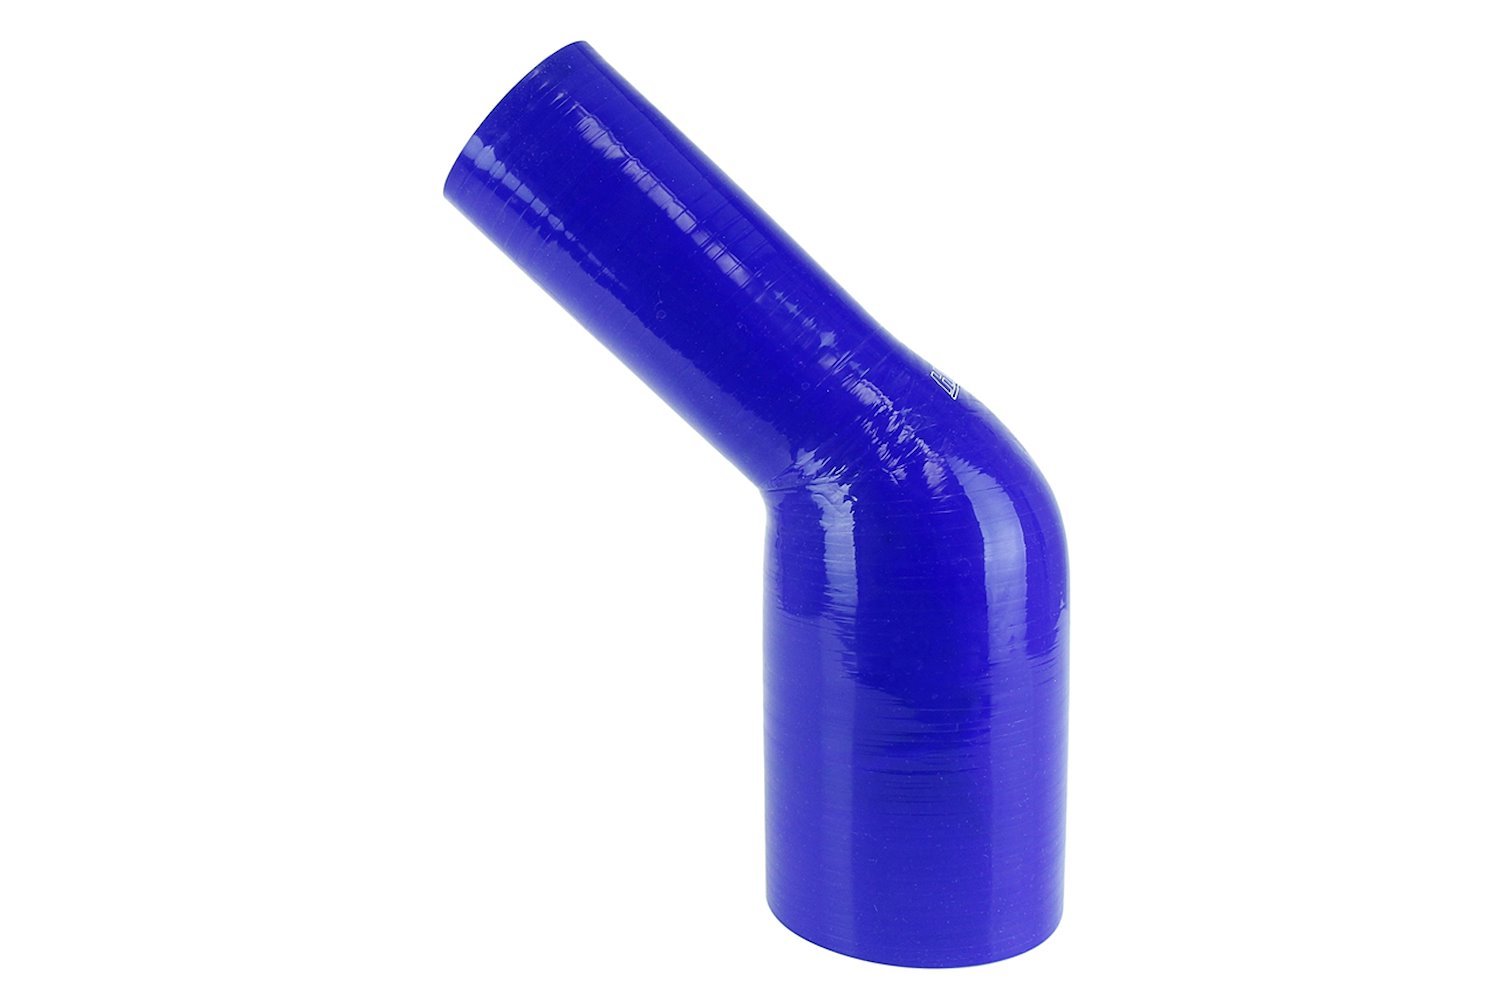 HTSER45-238-256-BLUE Silicone 45-Degree Elbow Hose, High-Temp Reinforced, 2-3/8 in. - 2-9/16 in. ID, Blue